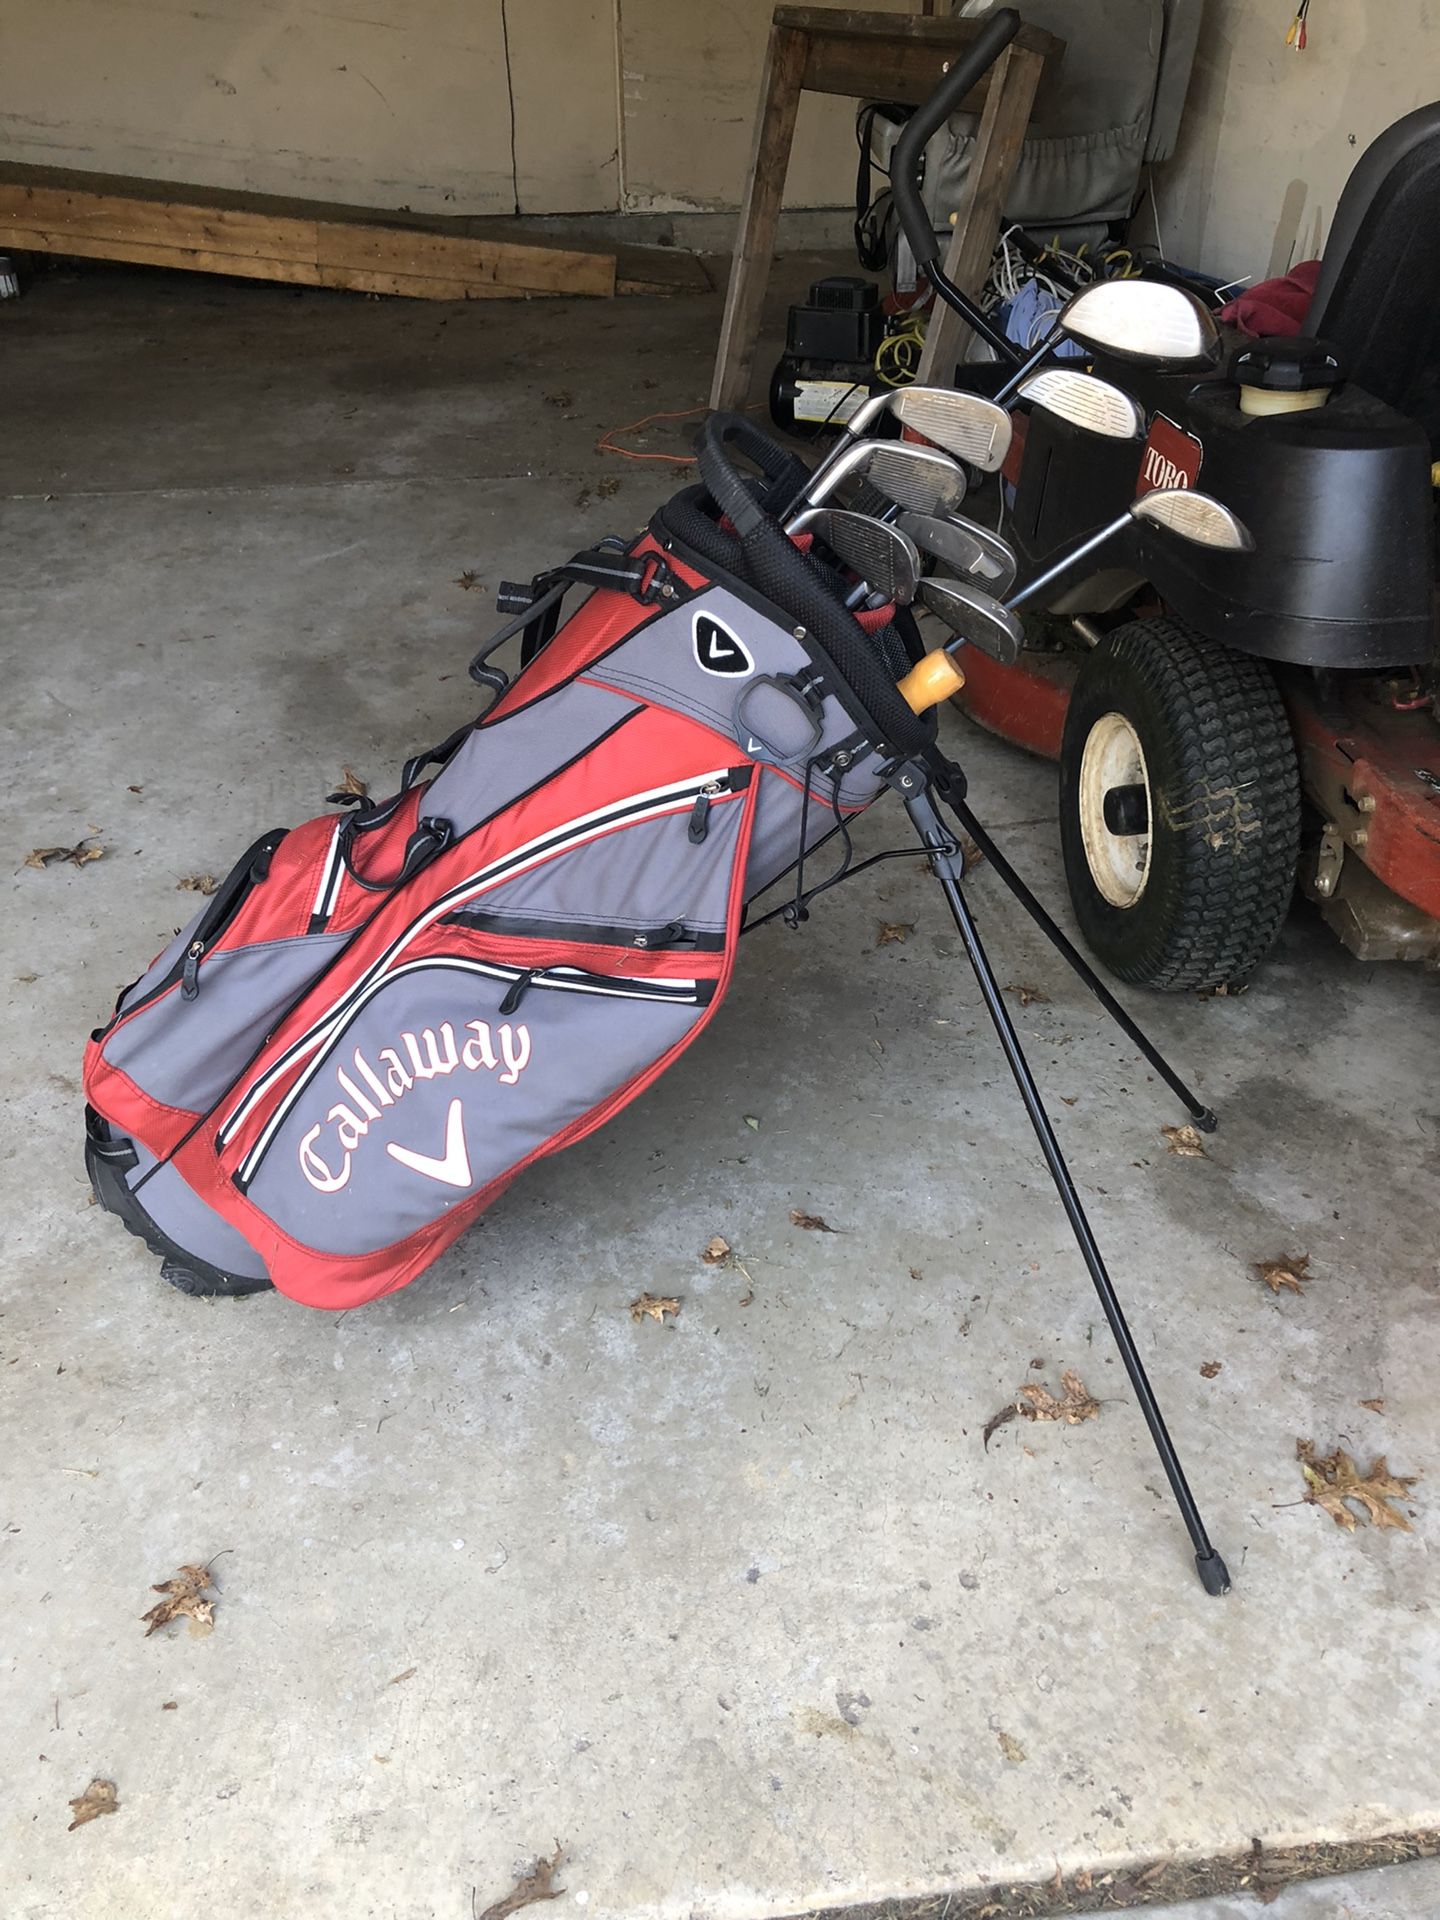 Calloway golf bag and several clubs including two Big Bertha woods